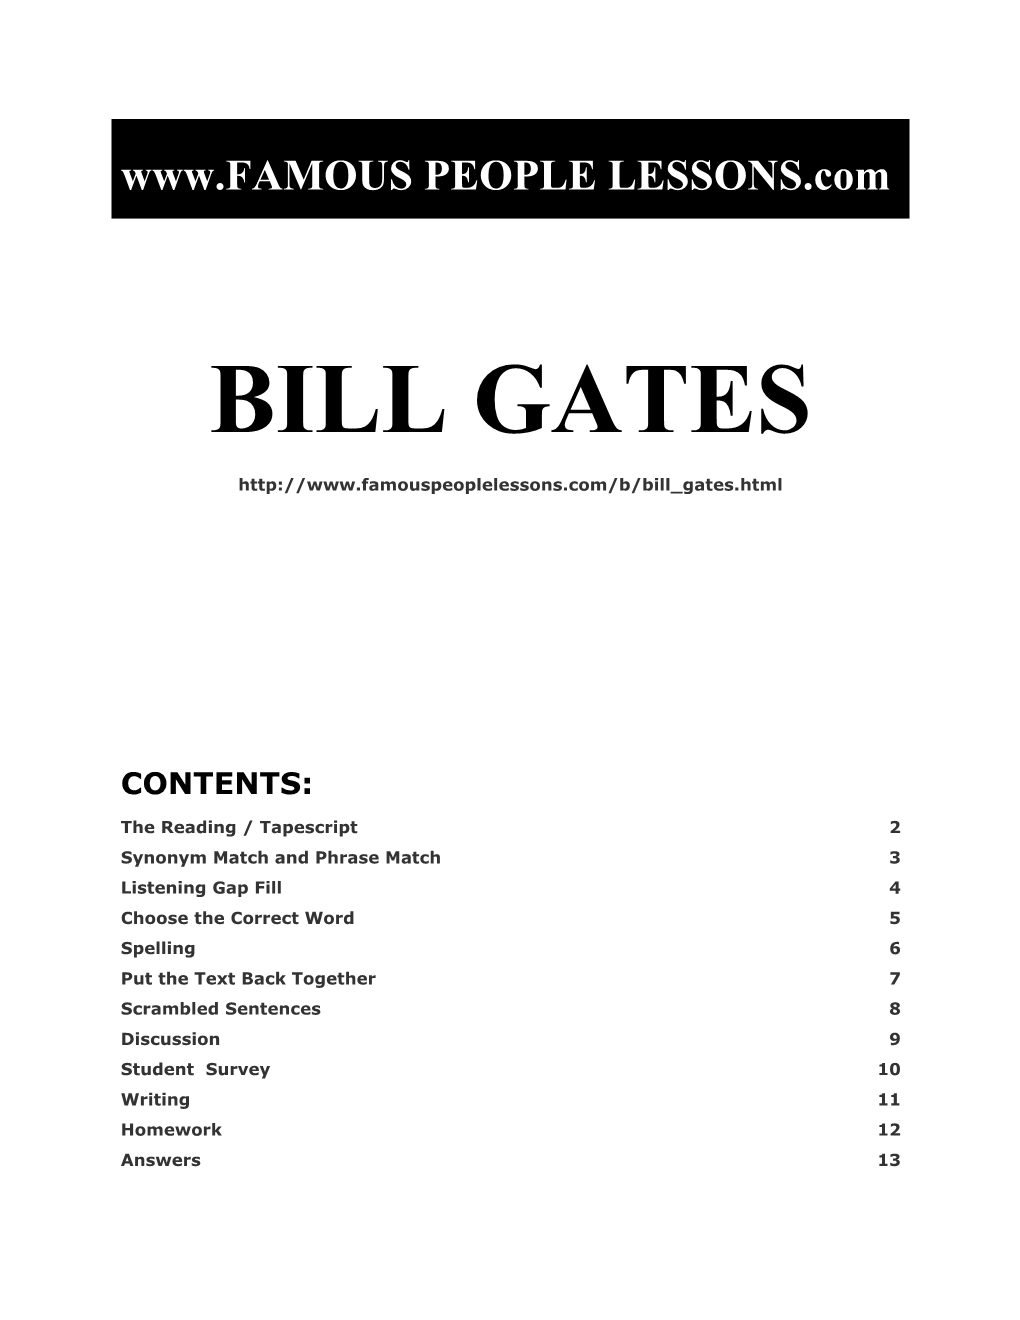 Famous People Lessons - Bill Gates